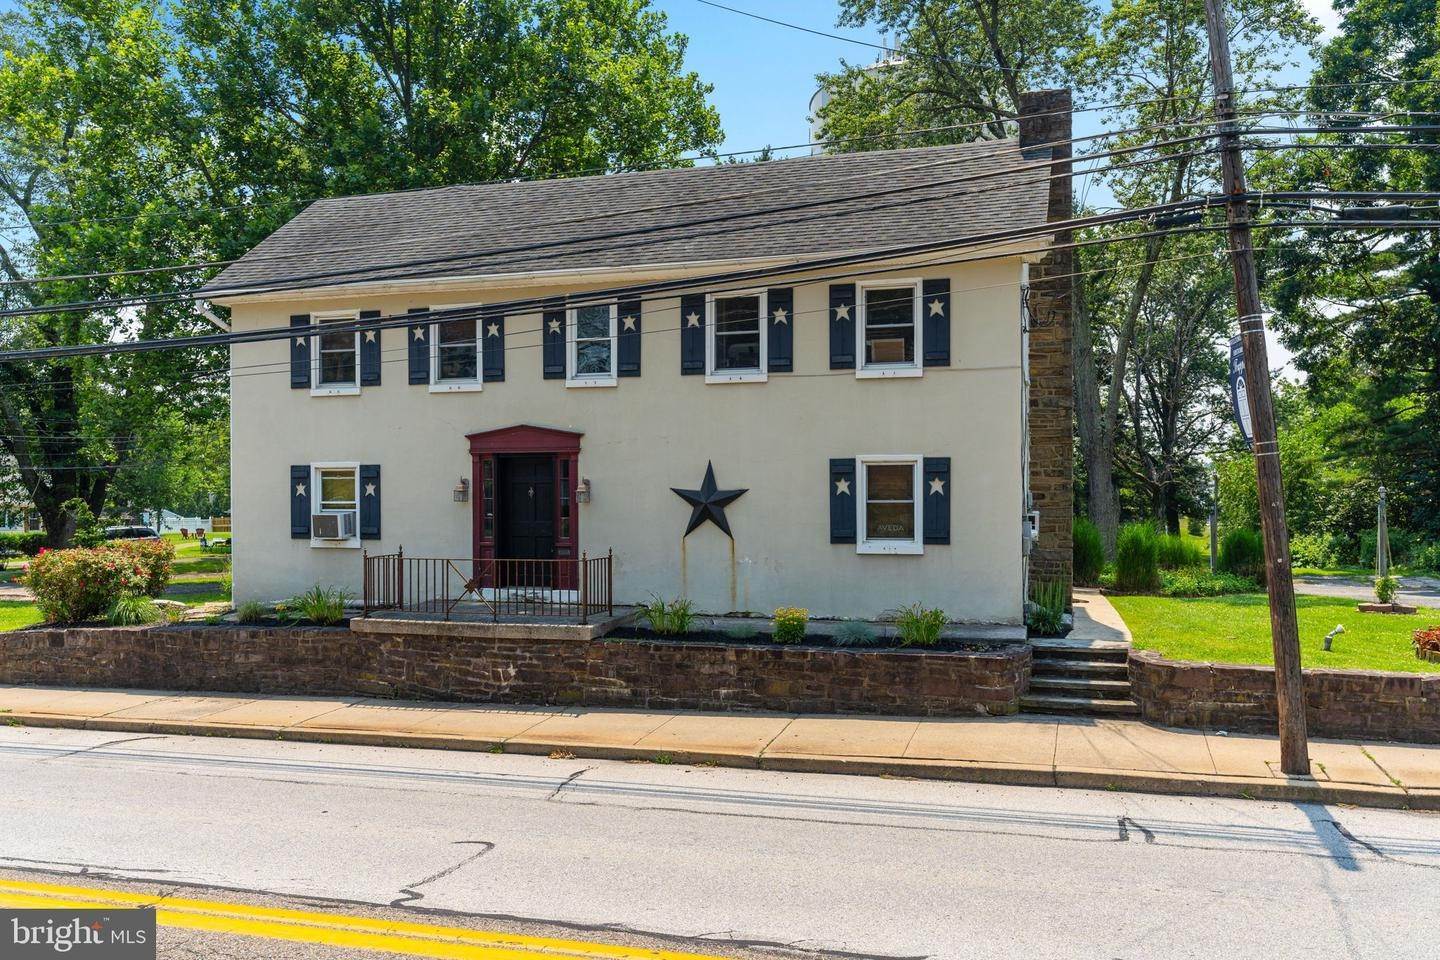 2. Multi Family for Sale at 12 W MAIN Street Collegeville, Pennsylvania 19426 United States